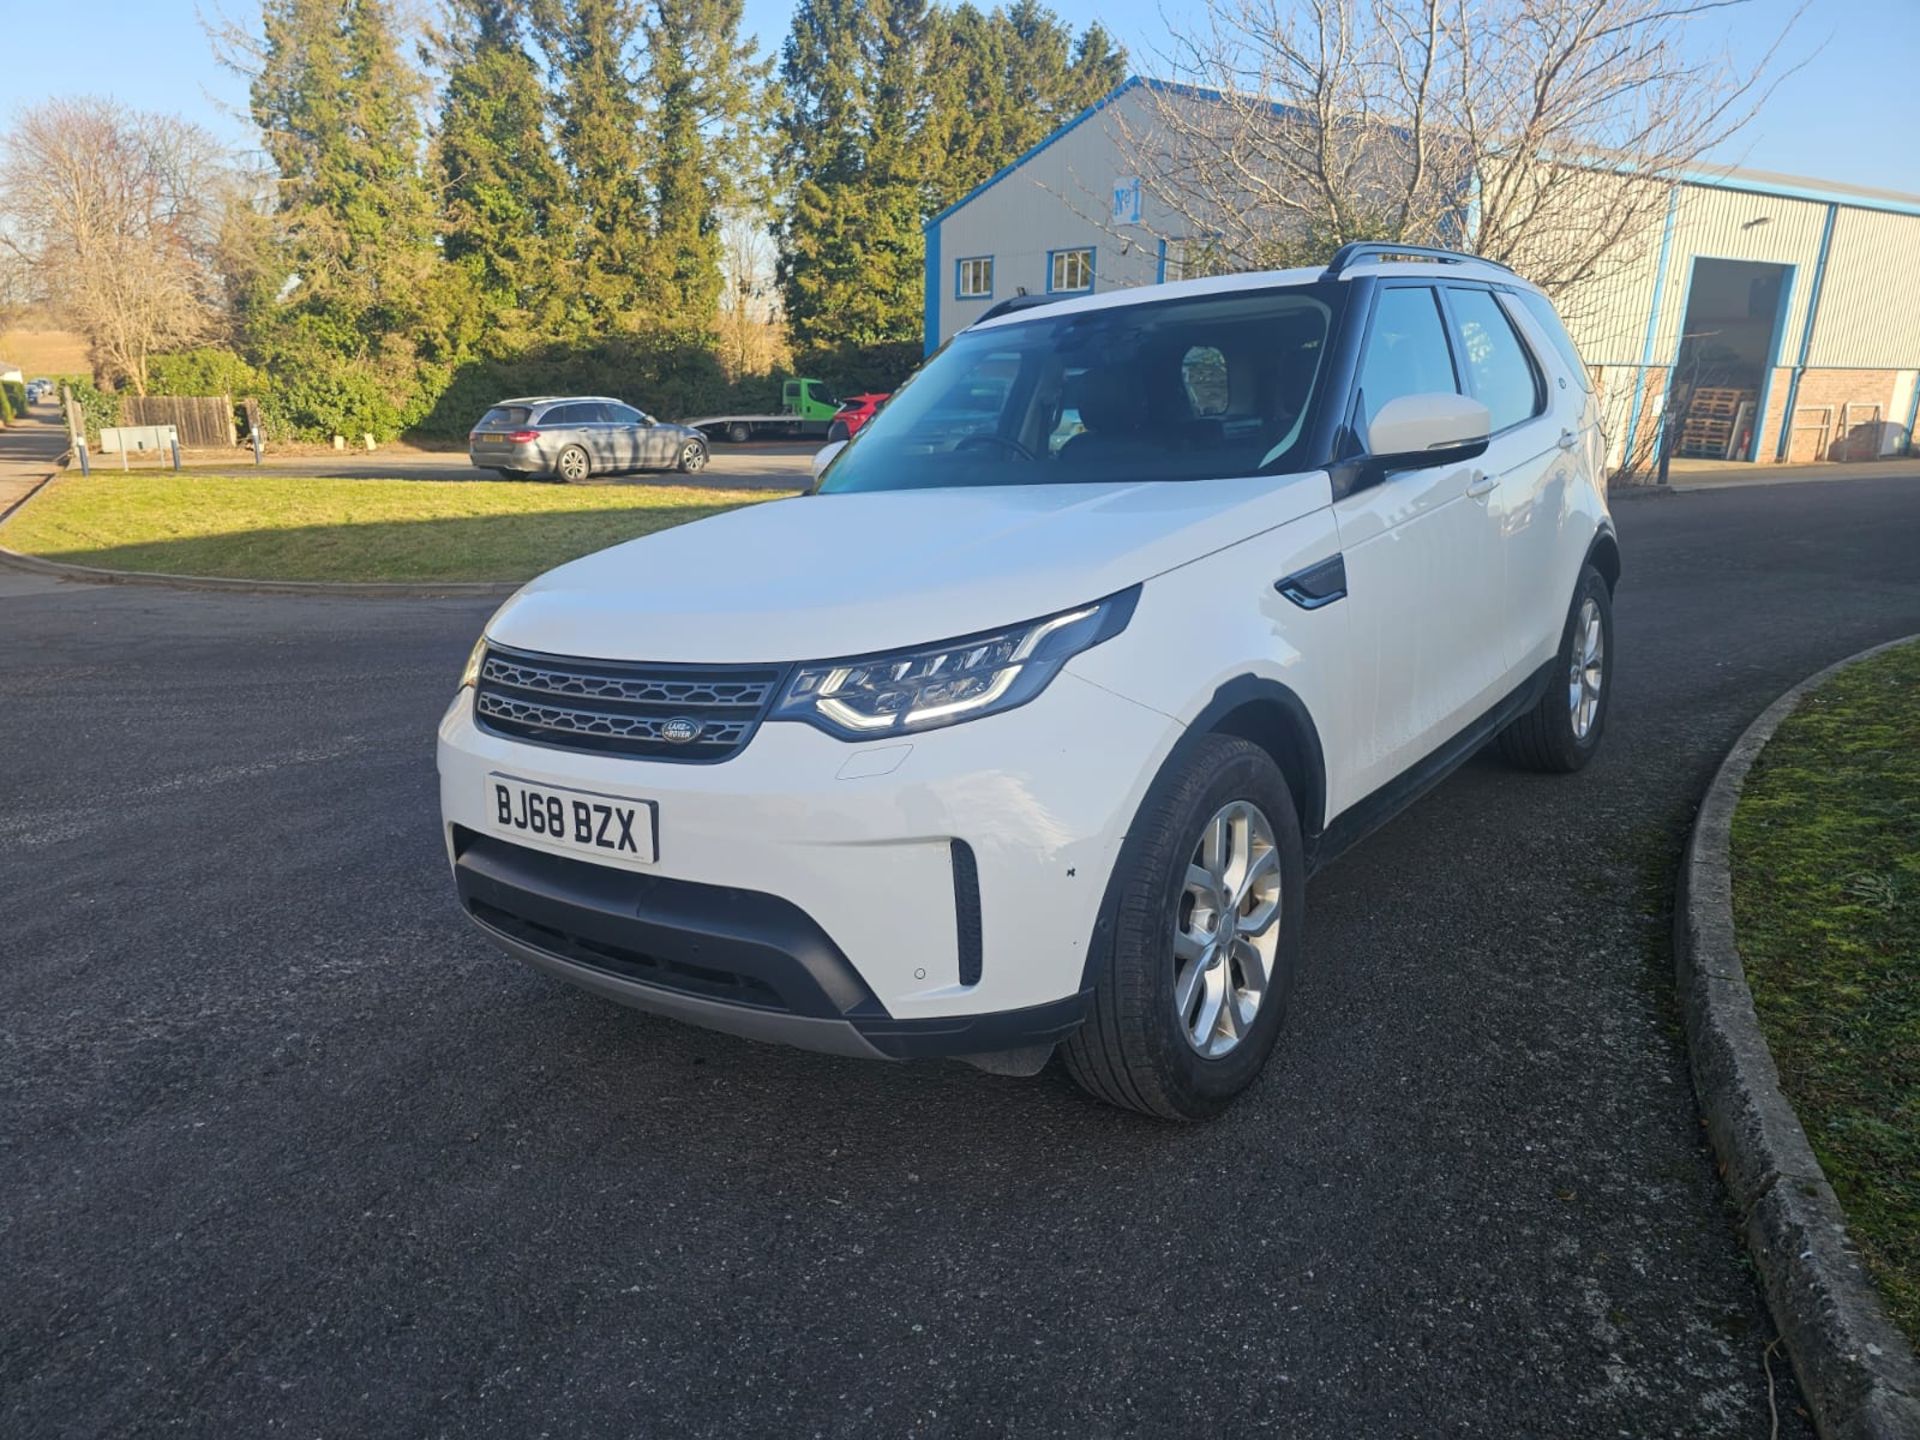 2018 DISCOVERY 5 SE RUNS AND DRIVES PERFECTLY - Bild 3 aus 6